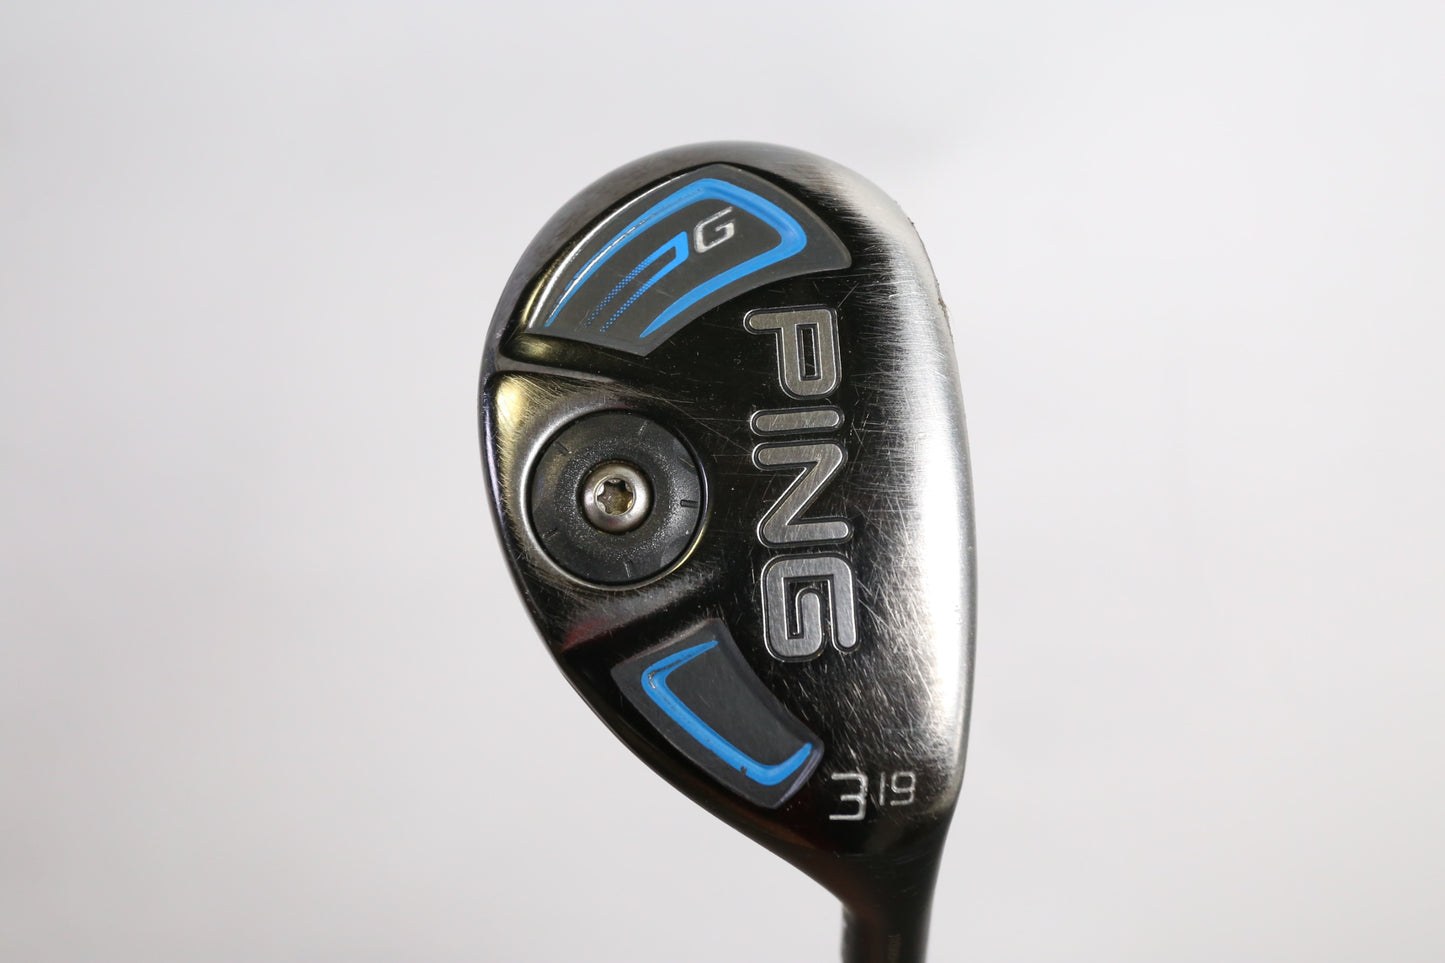 Used Ping G 3H Hybrid - Right-Handed - 19 Degrees - Stiff Flex